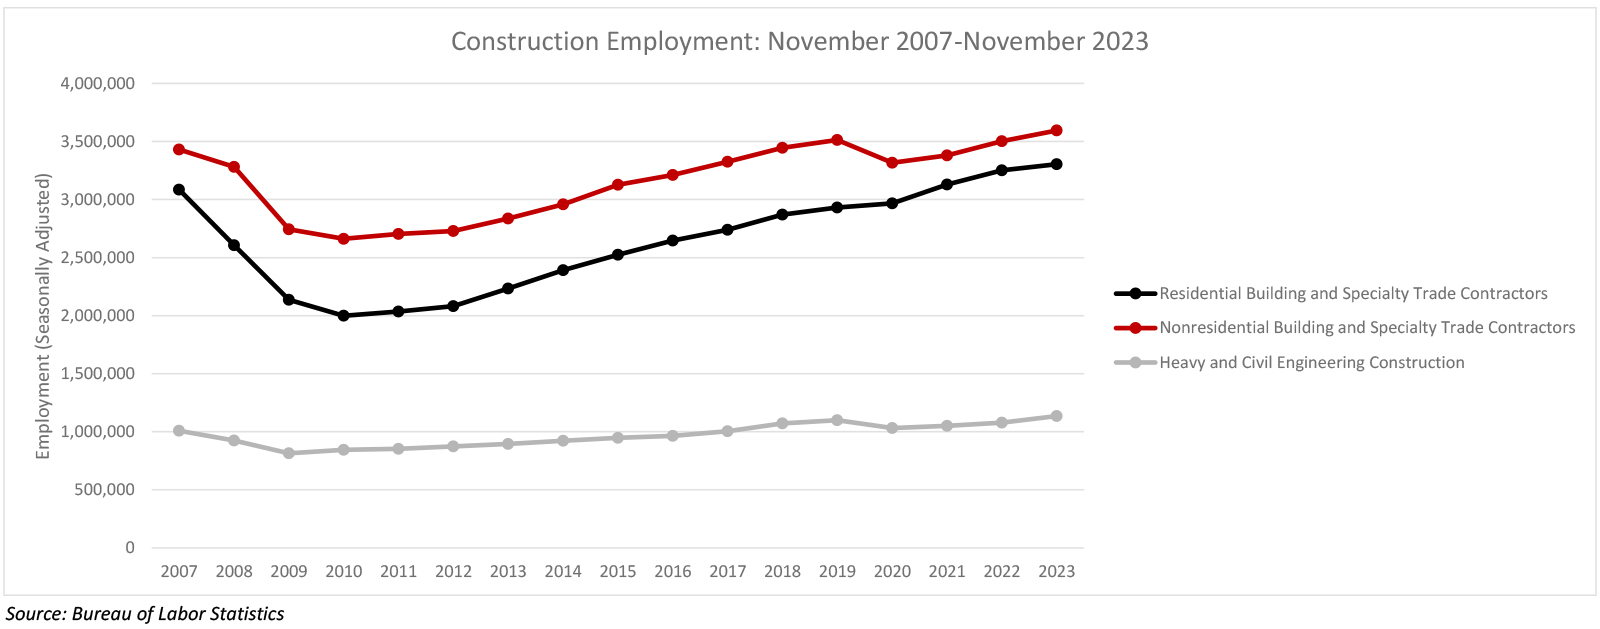 Nonresidential Construction Employment Increased by 1,400 in November